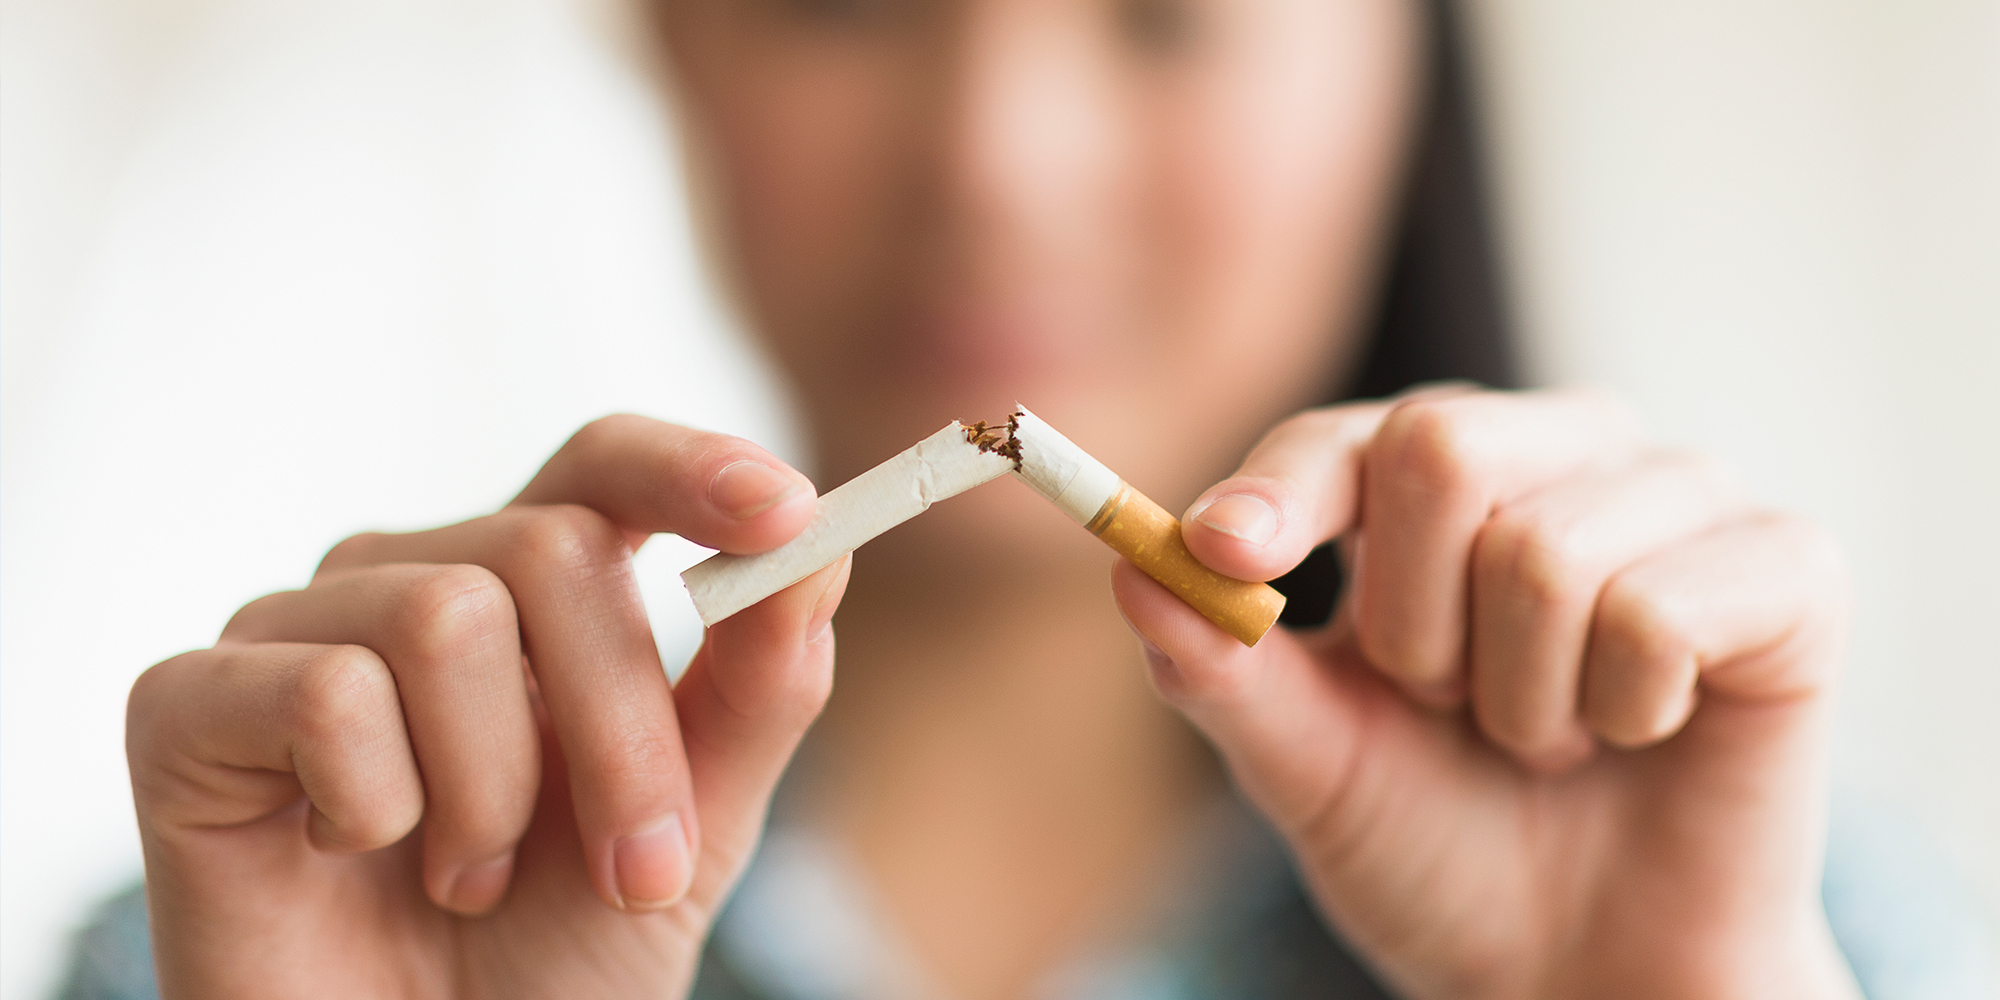 The Dangers of Smoking and How to Stop